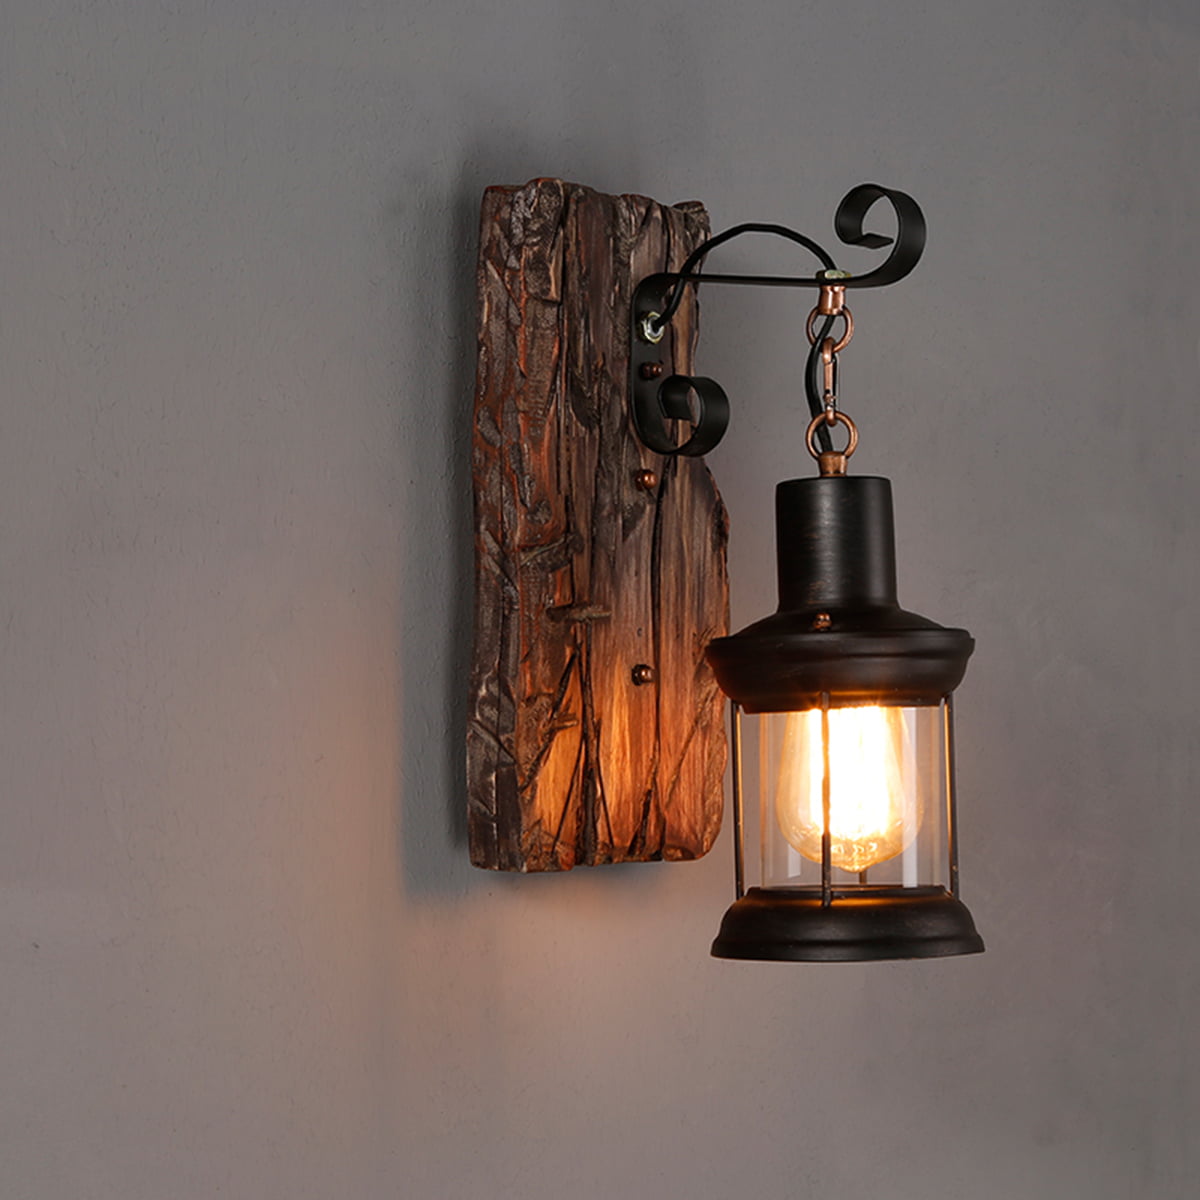 Vintage Retro Industrial Loft Rustic Wall Sconce Wall Lights Porch Lampshade UK